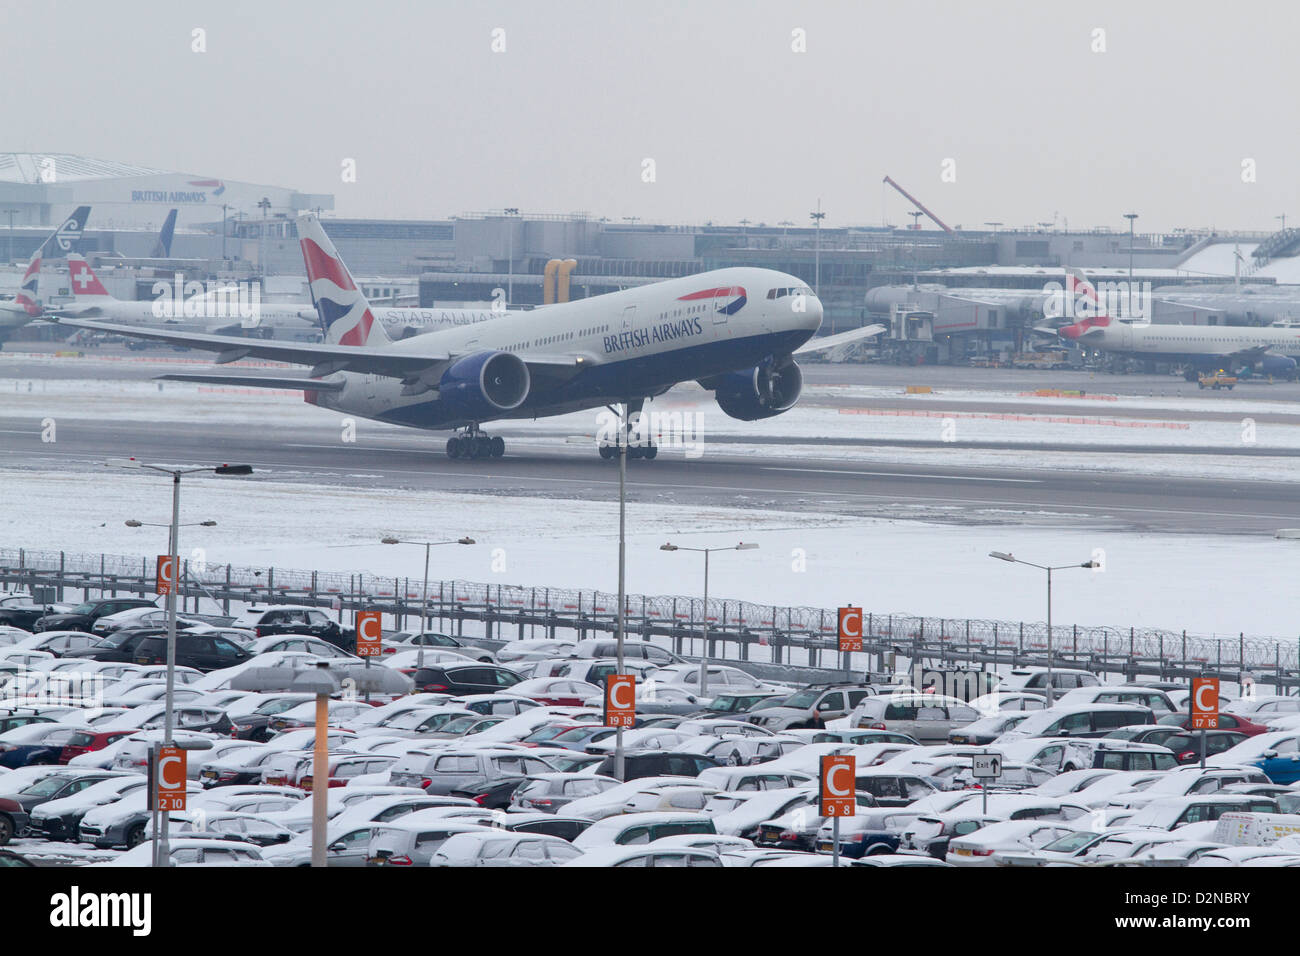 A British Airways commercial jet prepares to take off as Heathrow airport announces delays and cancellations due to bad weather Stock Photo